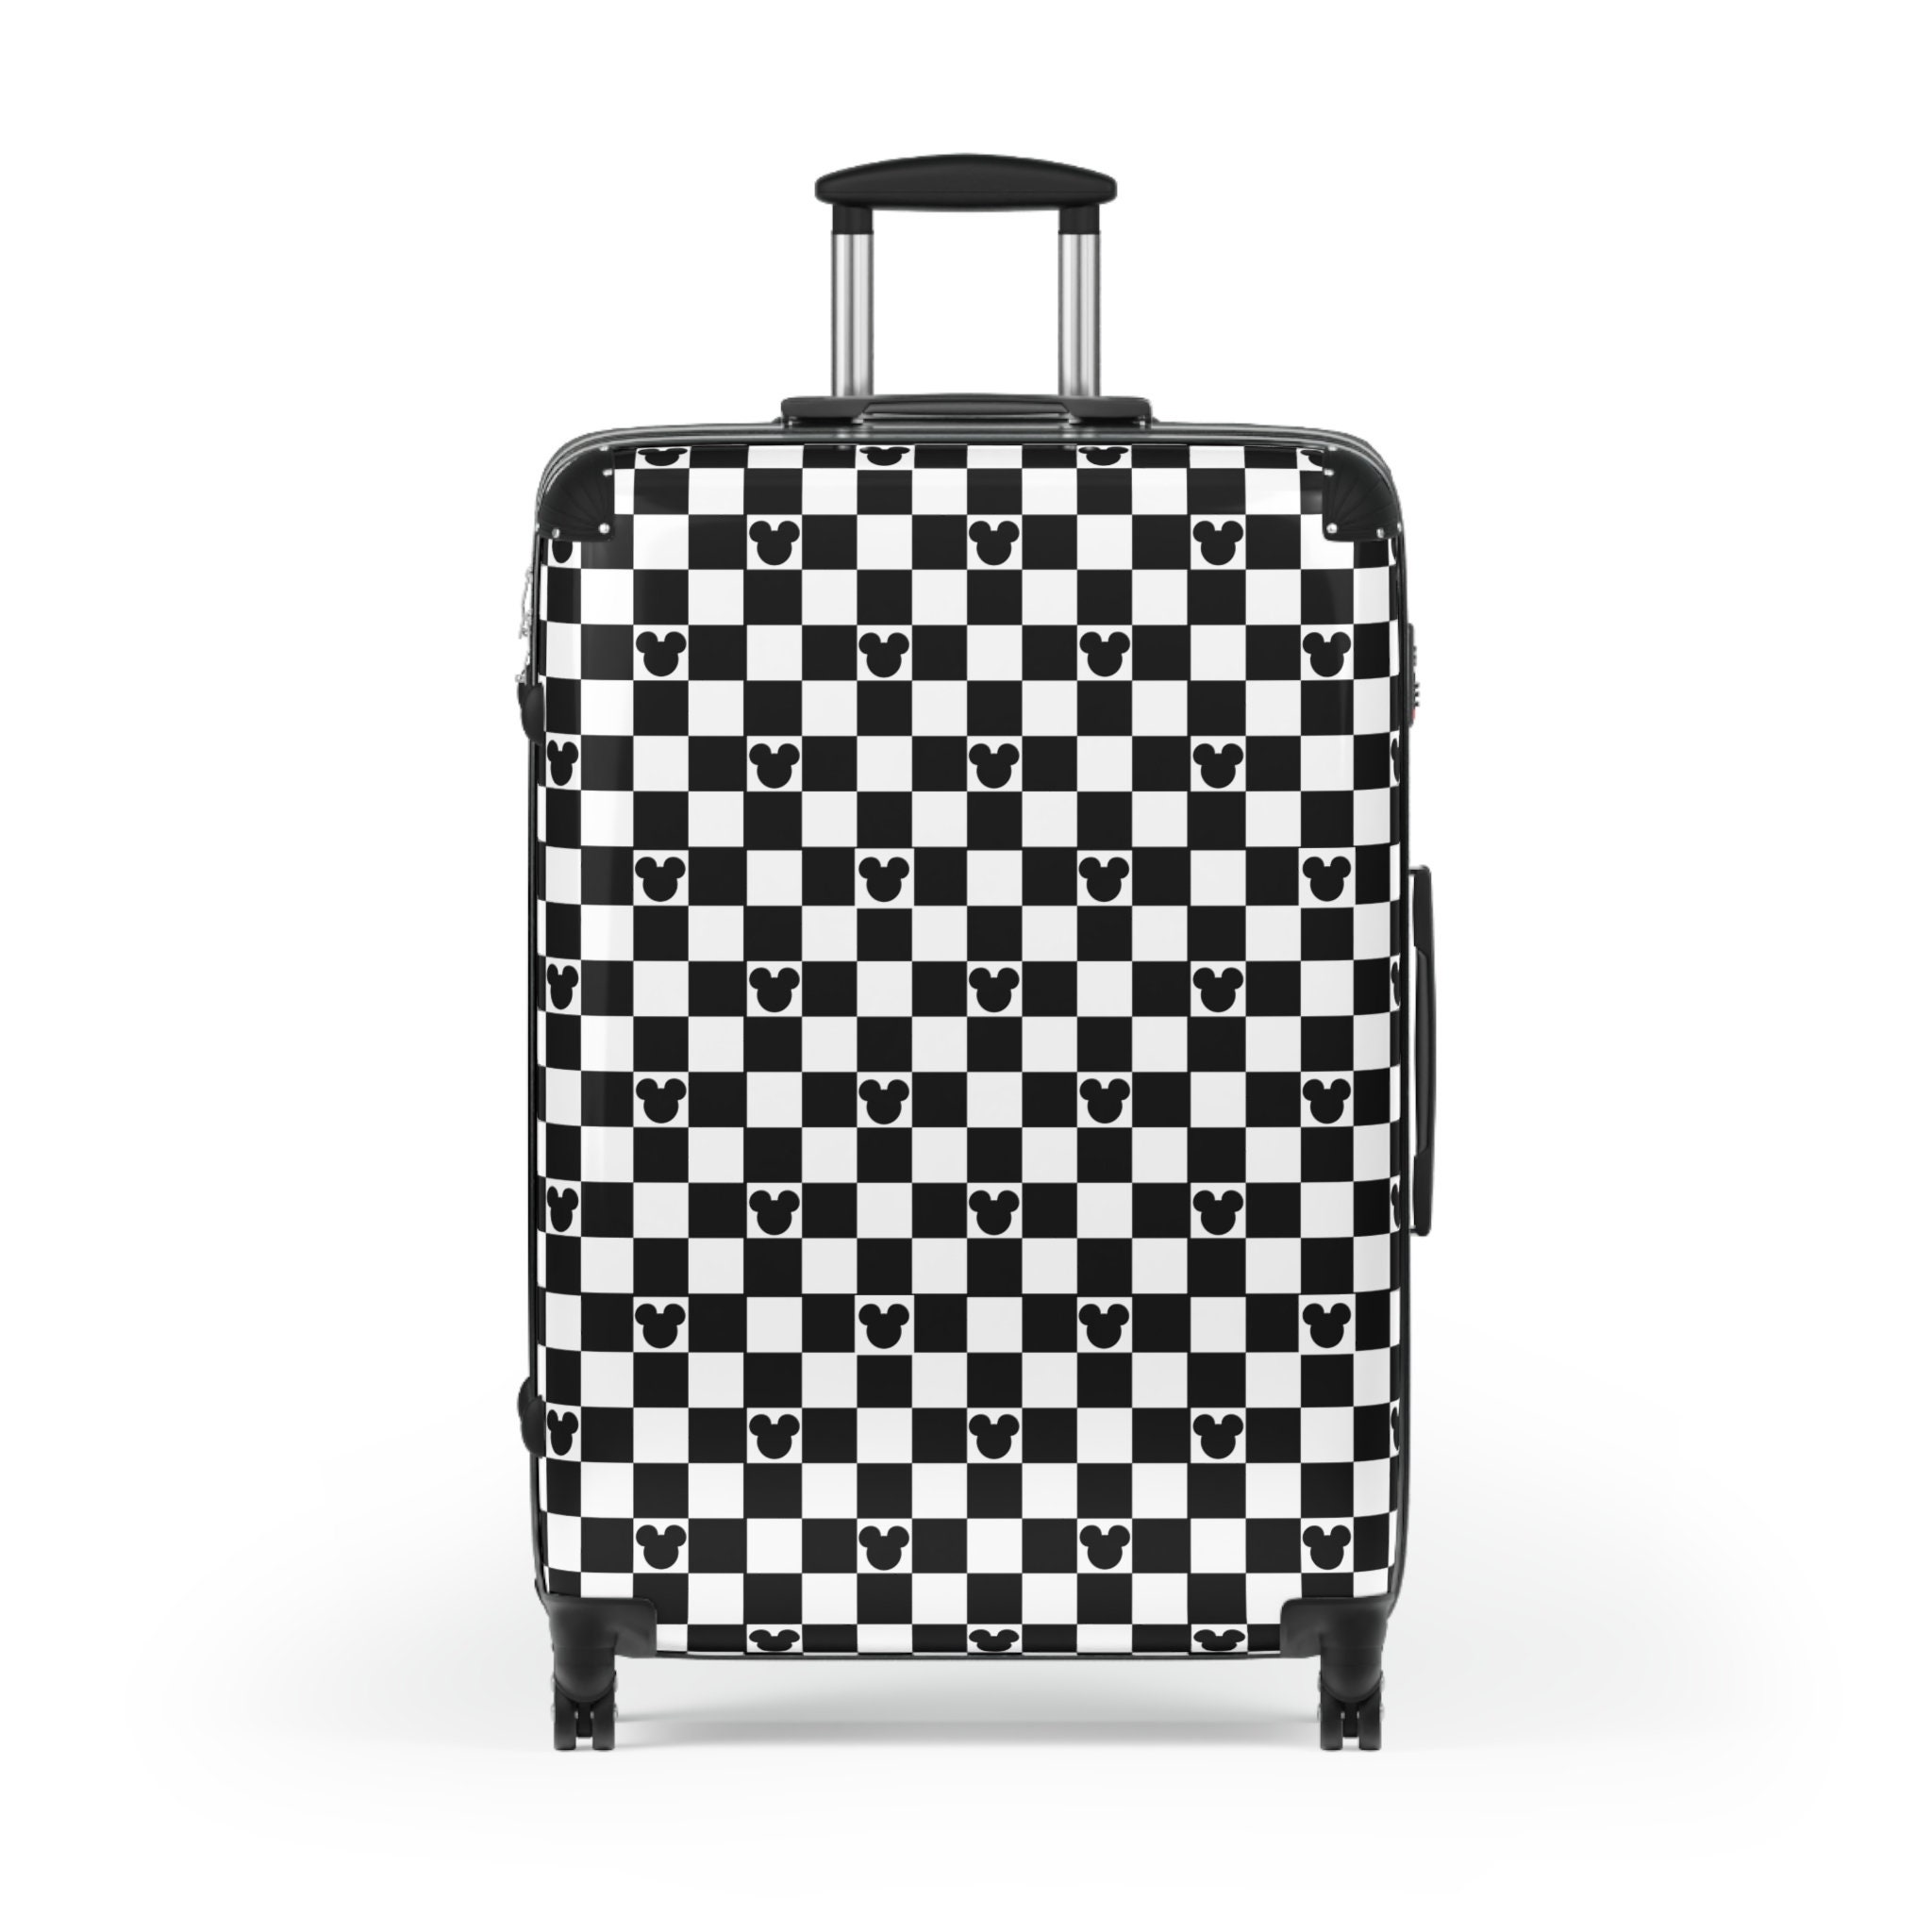 Disney Luggage cover, Mickey checkered Luggage cover, vacation Luggage